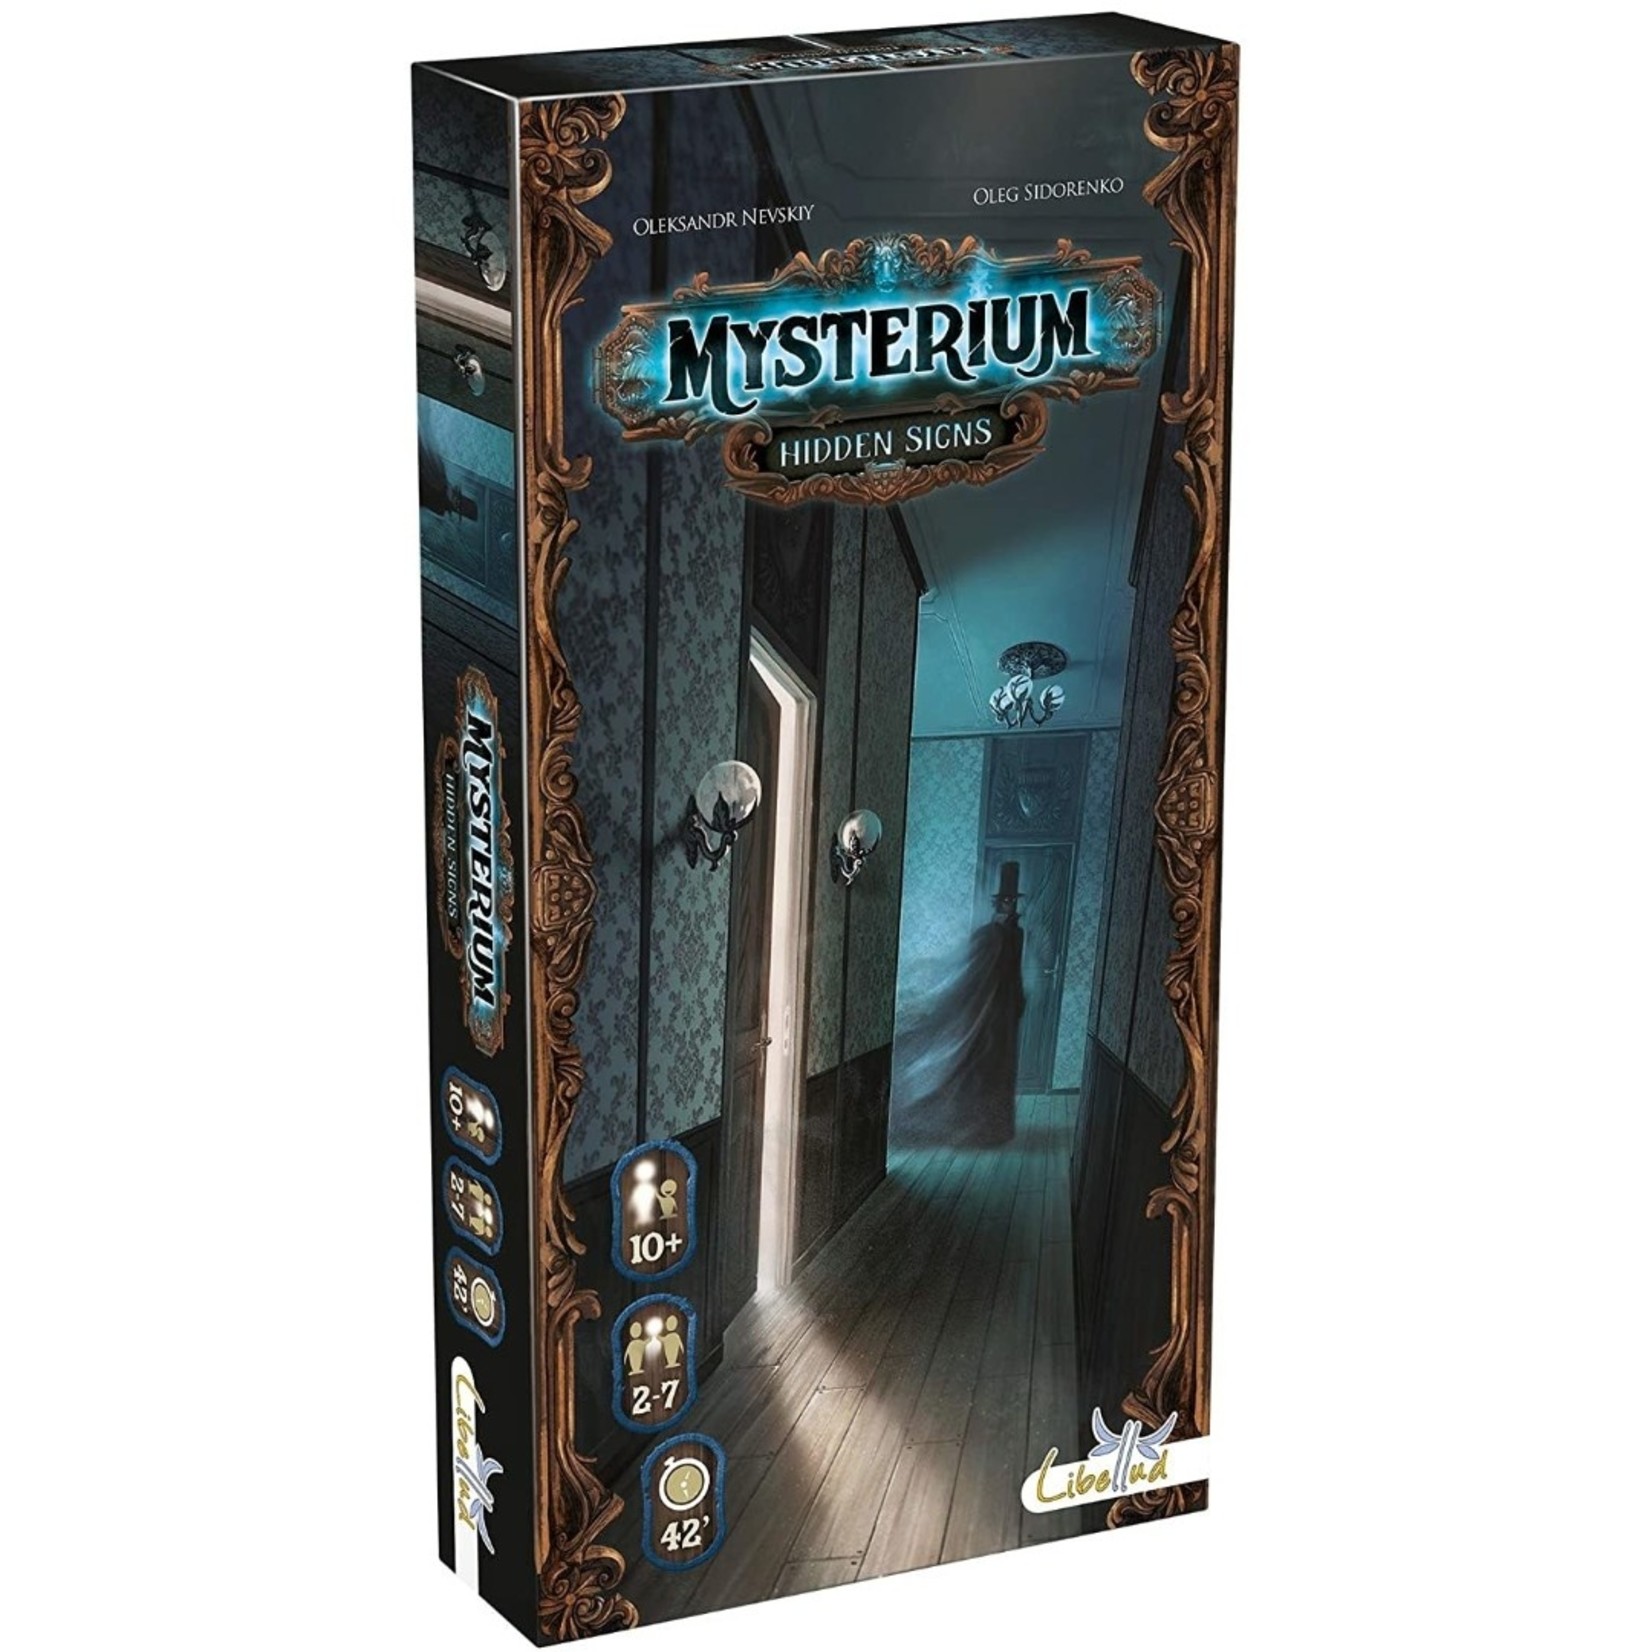 Libellud Mysterium Hidden Signs Expansion